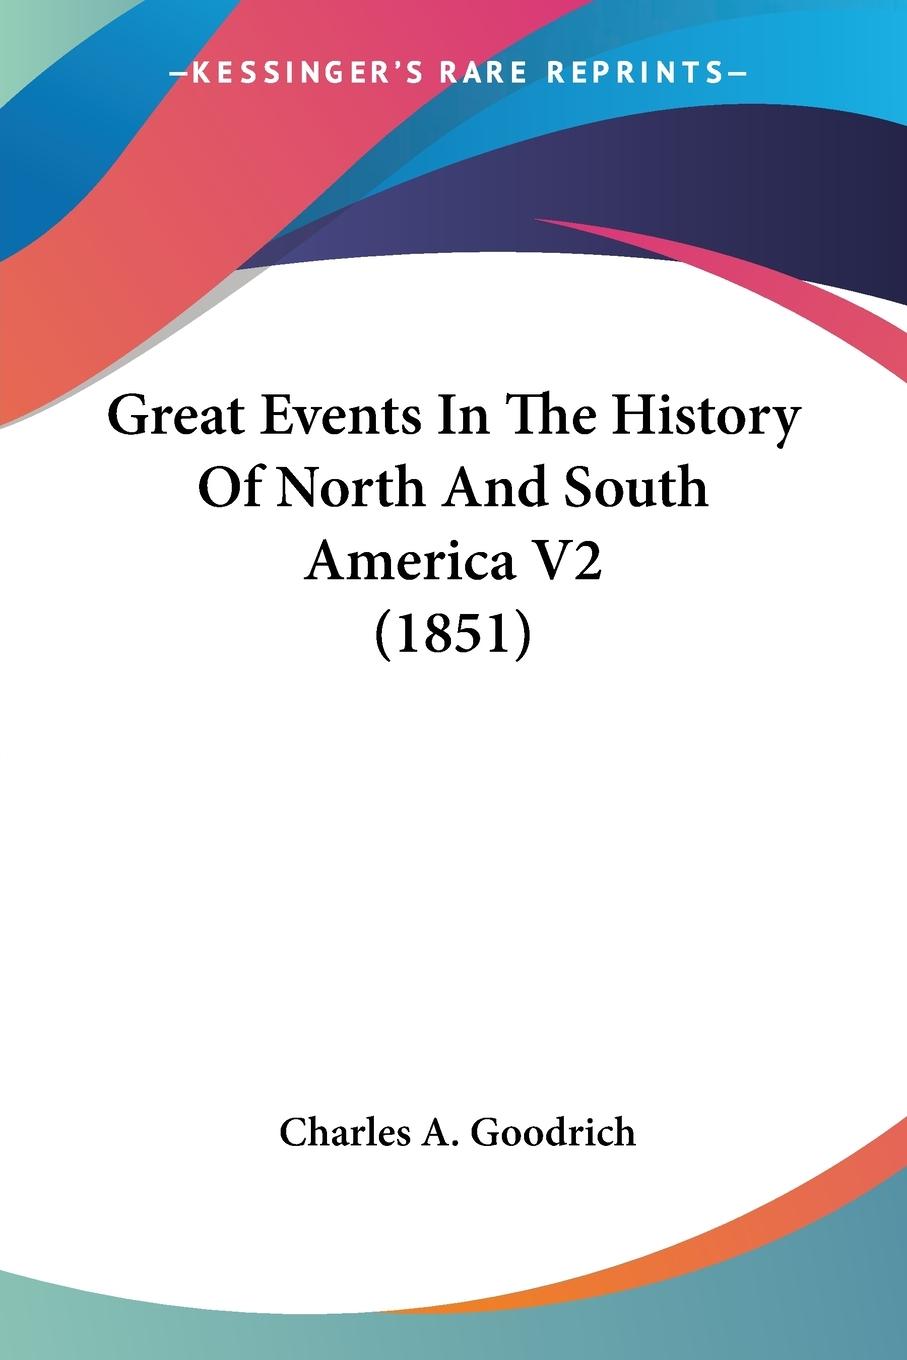 Great Events In The History Of North And South America V2 (1851) - Goodrich, Charles A.